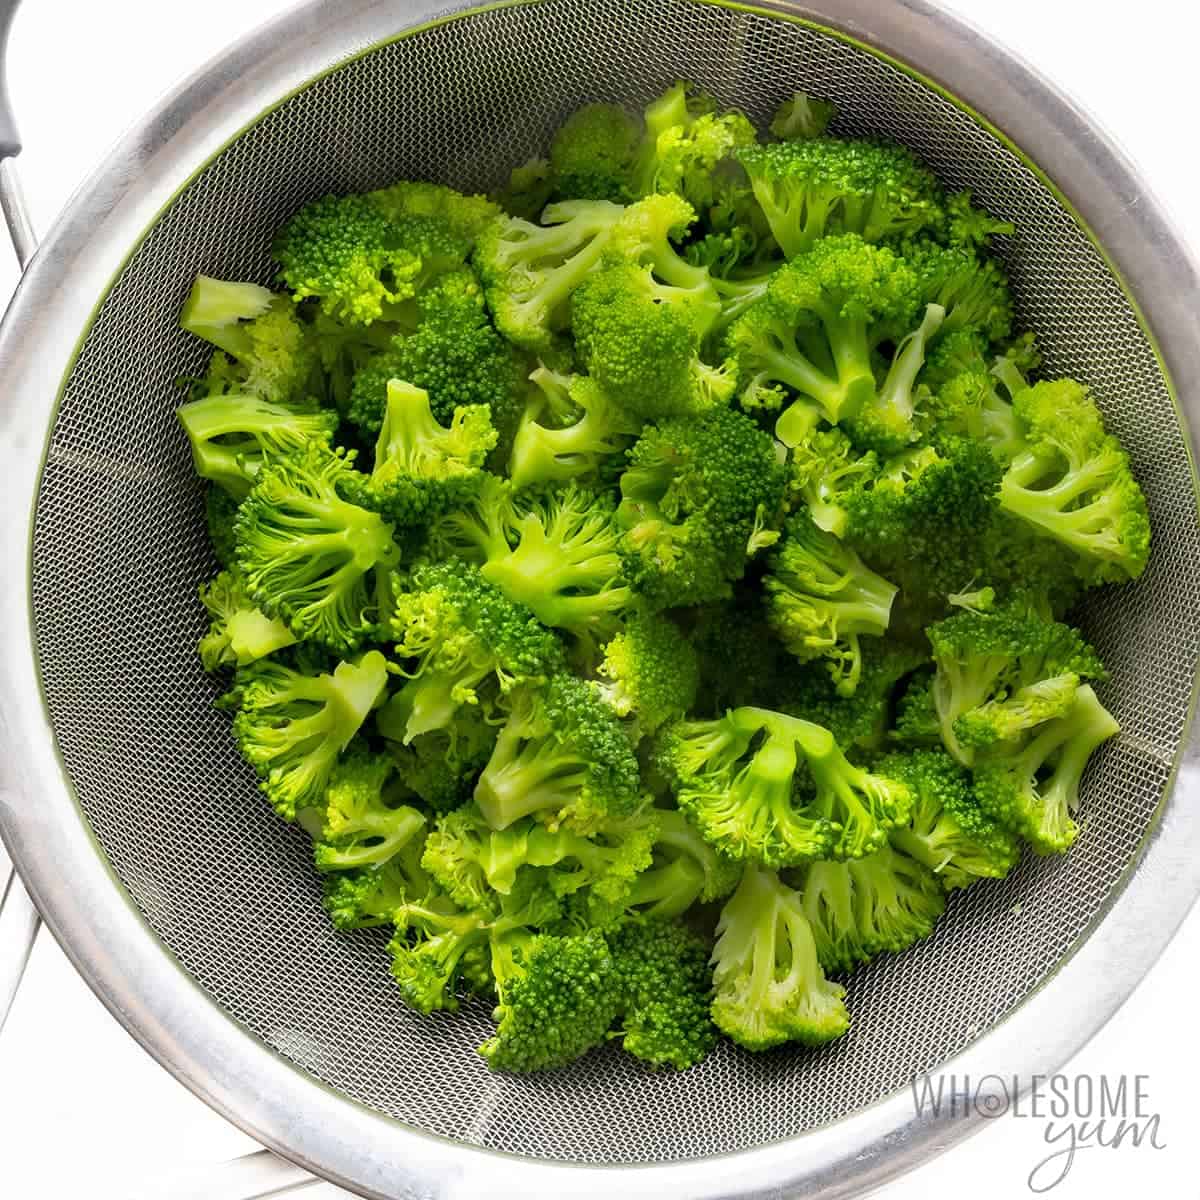 Cooked broccoli in a colander